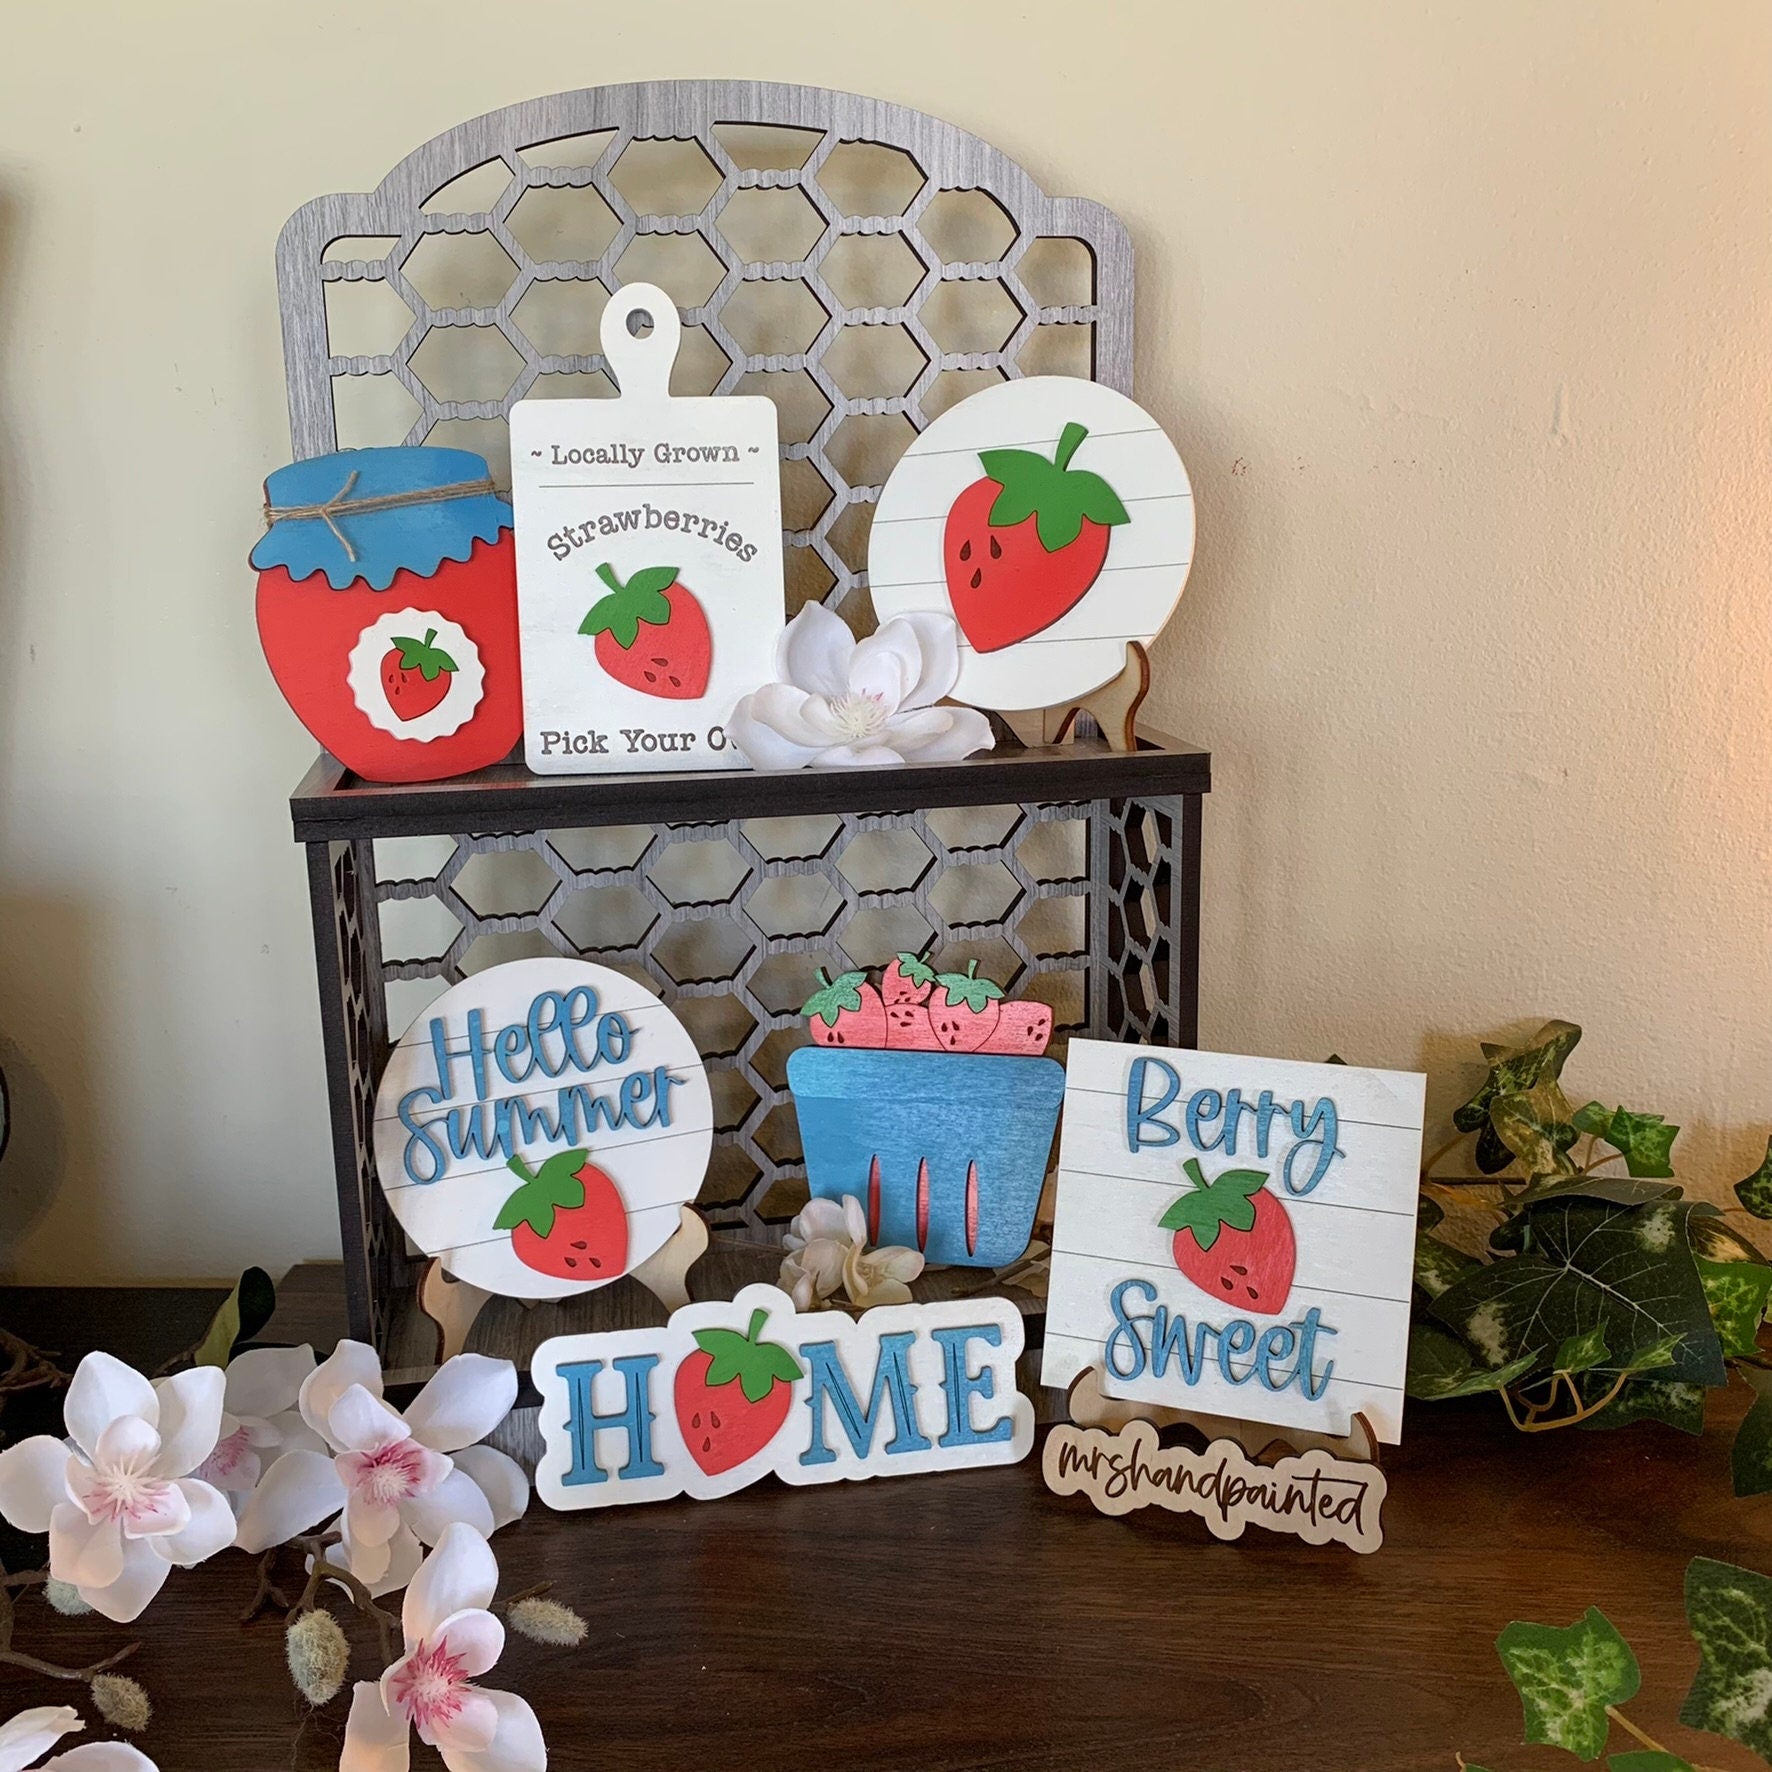 Strawberries Tiered Tray Decor - Laser Cut Wood Painted